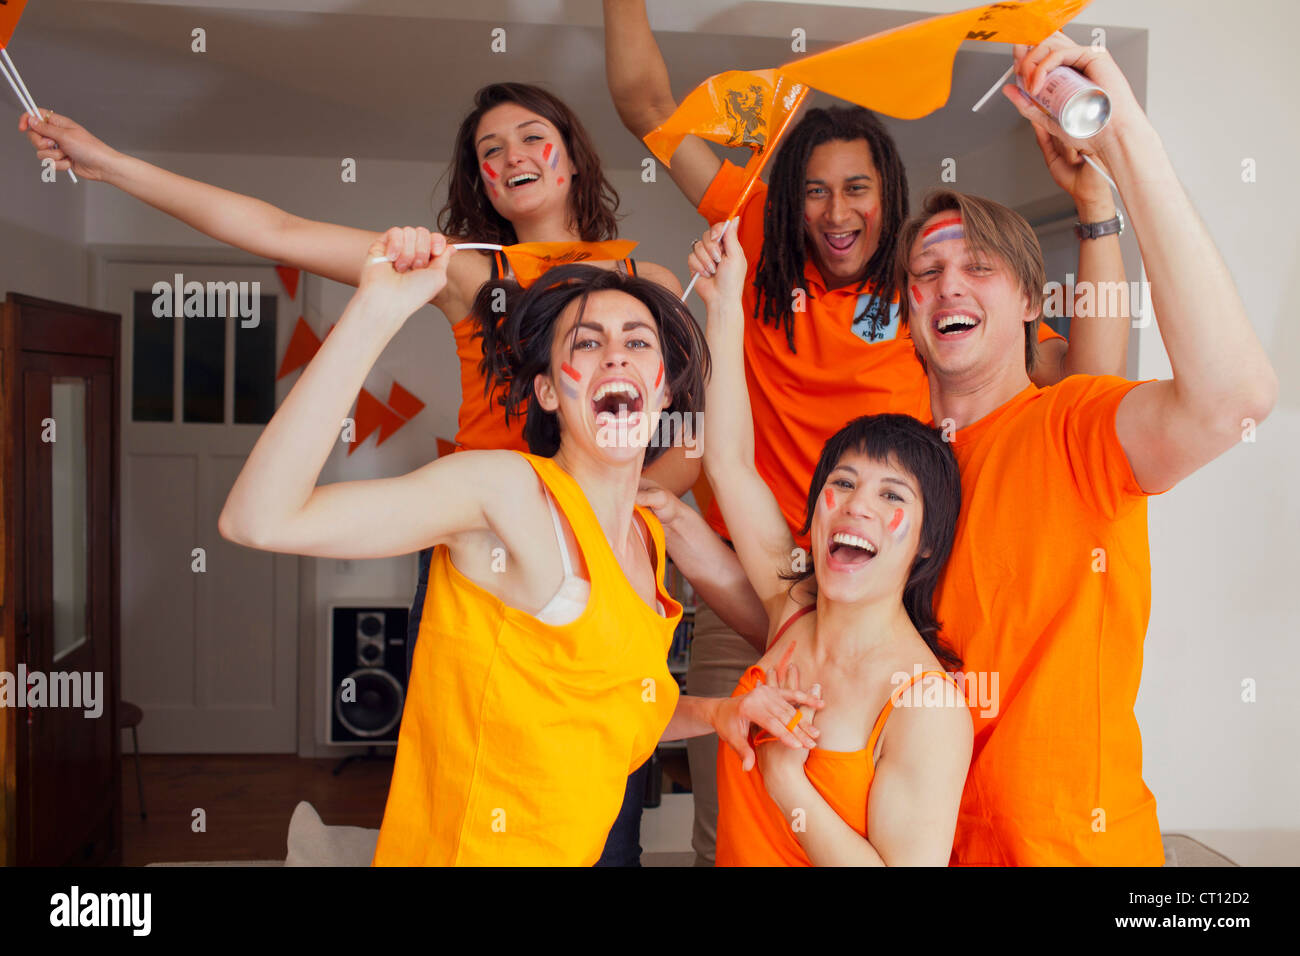 Friends cheering for sports together Stock Photo